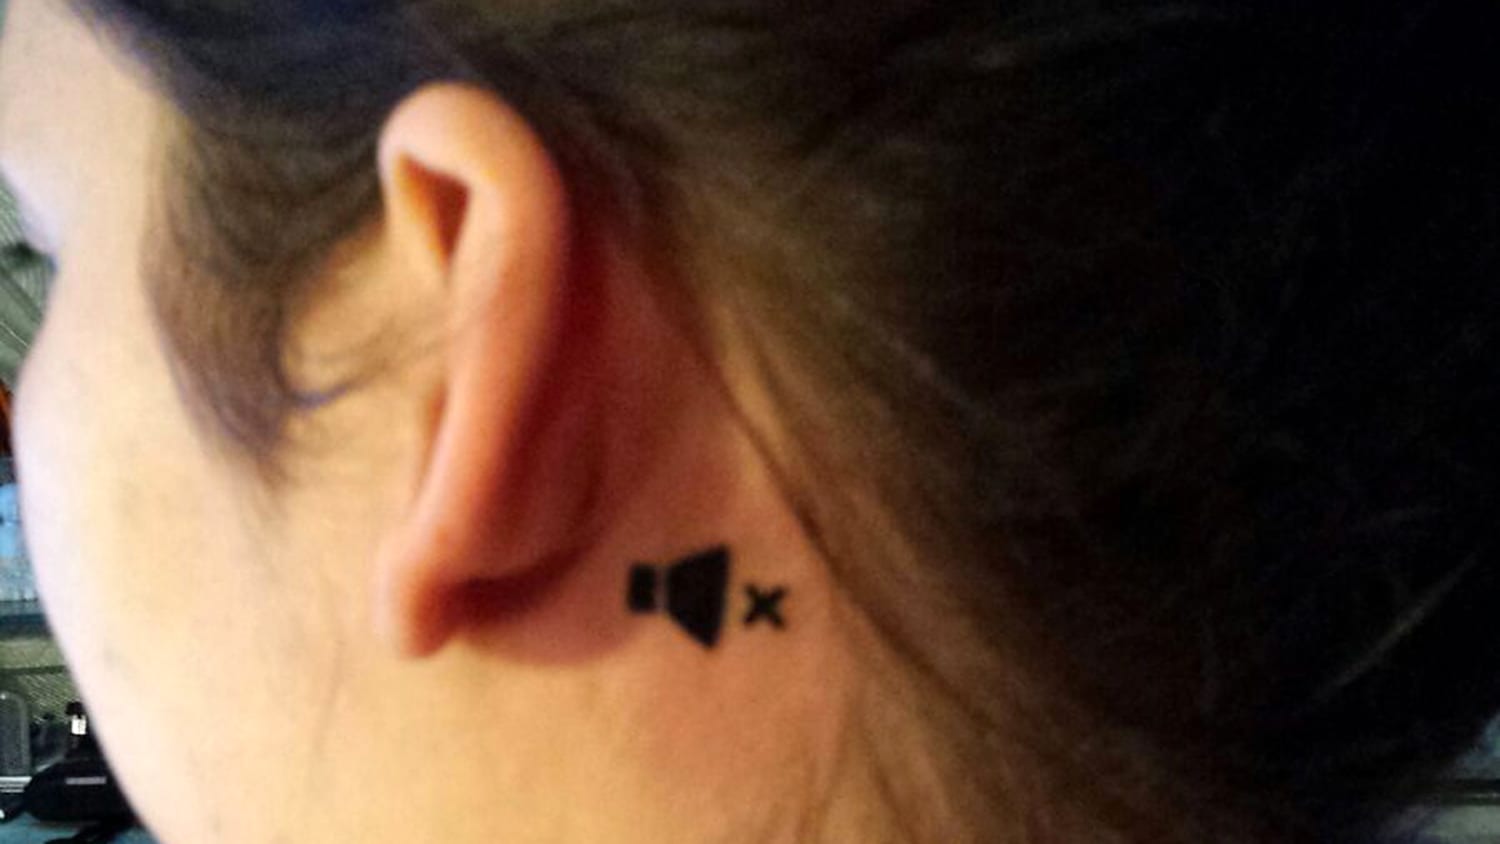 Tiny airplane tattoo on the right ear